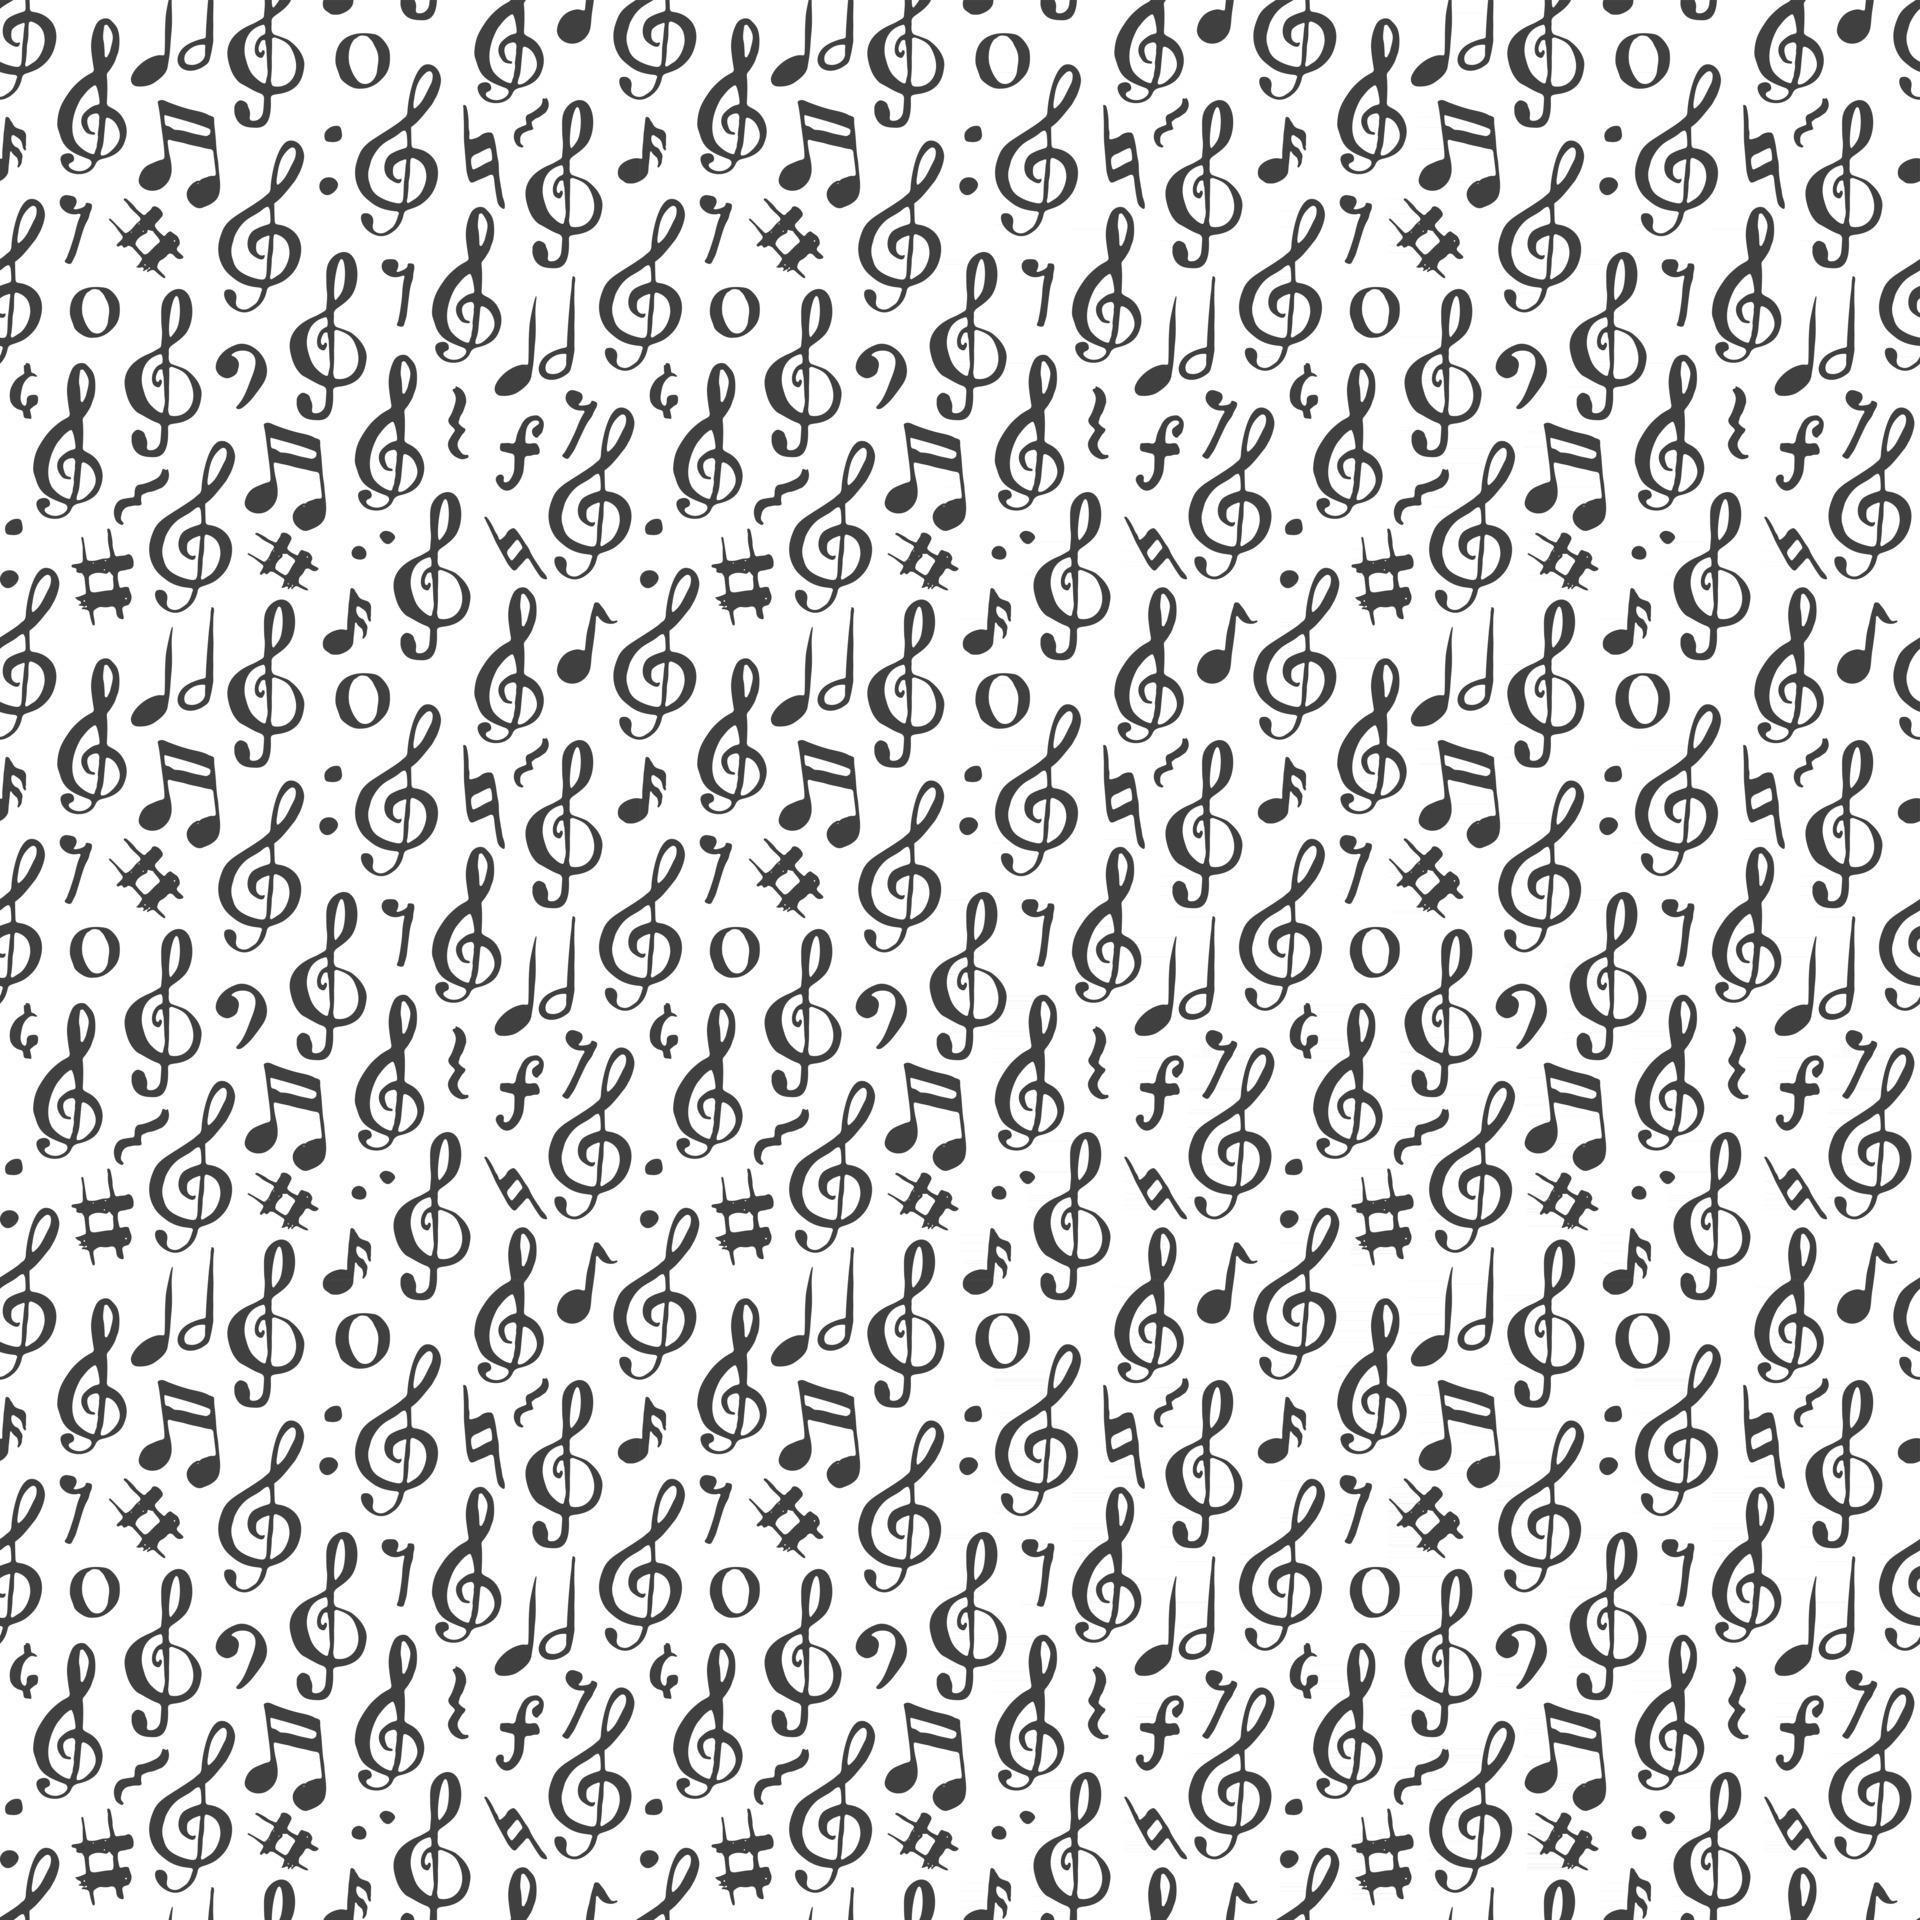 Music note seamless pattern vector illustration. Hand drawn sketched ...